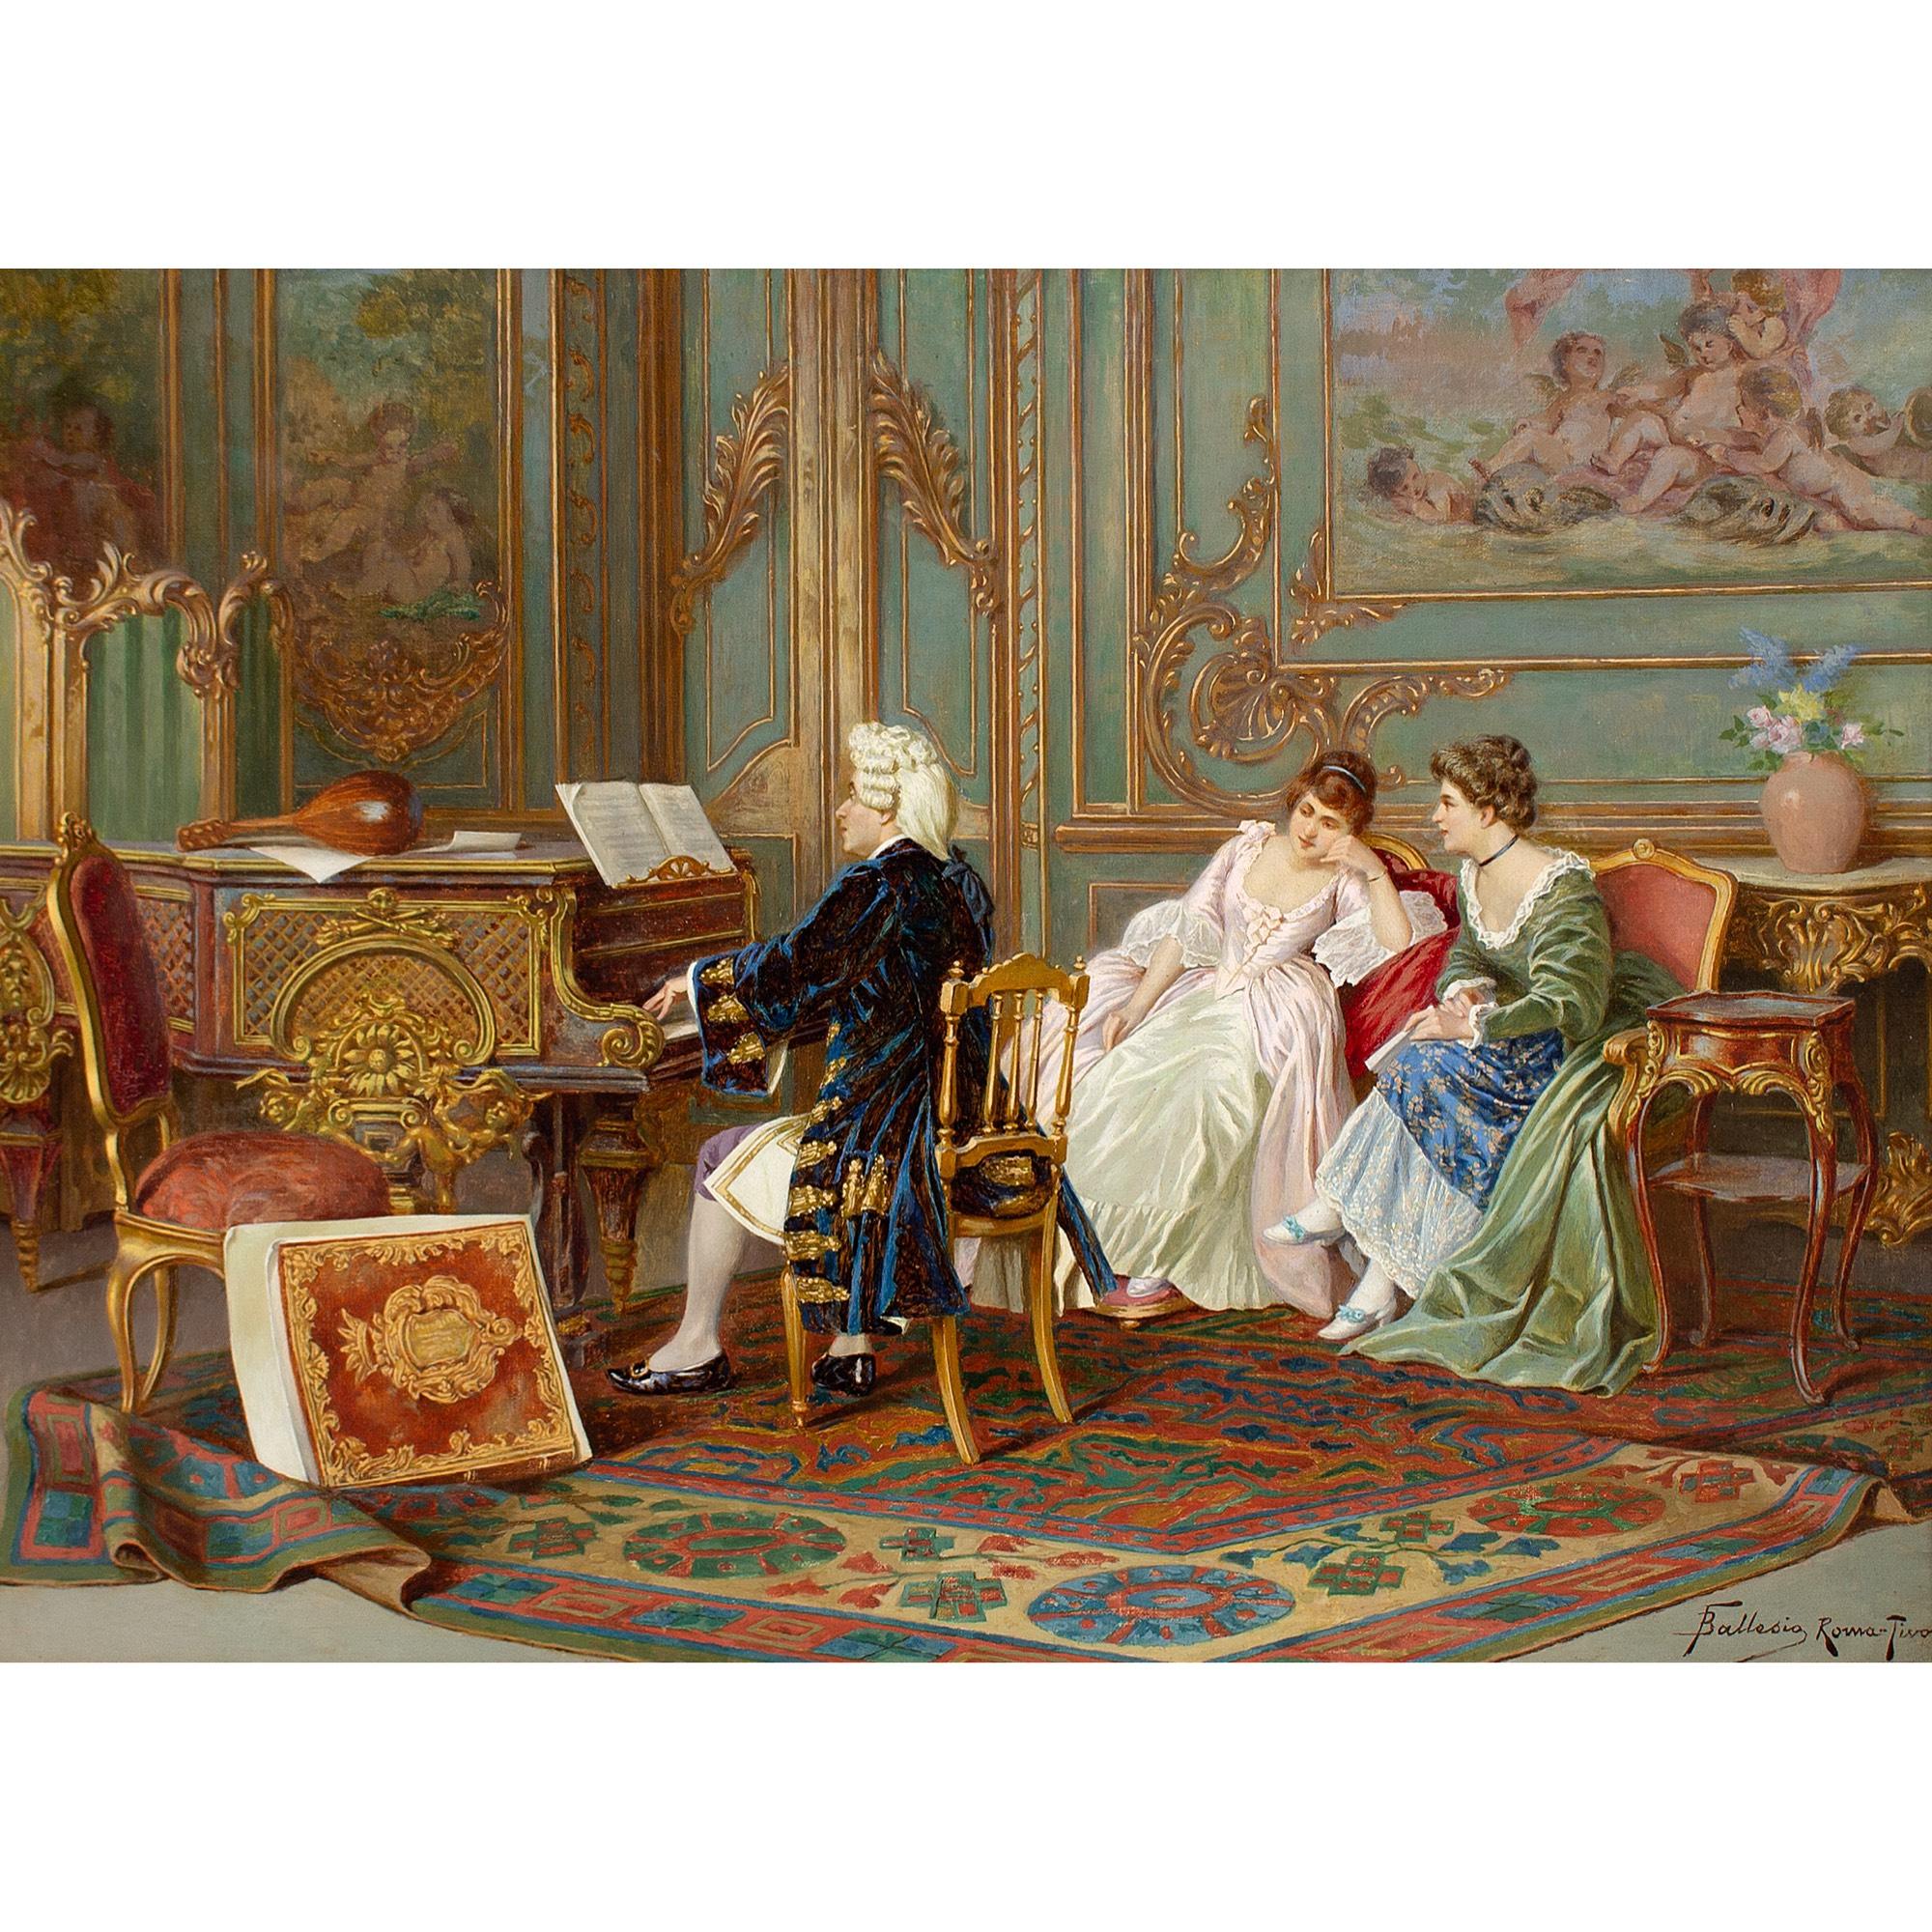 This exquisite late 19th-century oil painting by Italian artist Francesco Ballesio (1860-1923) depicts an 18th-century music lesson within a grand setting.

Surrounded by the various decorative embellishments of a plush Italian interior, a bewigged